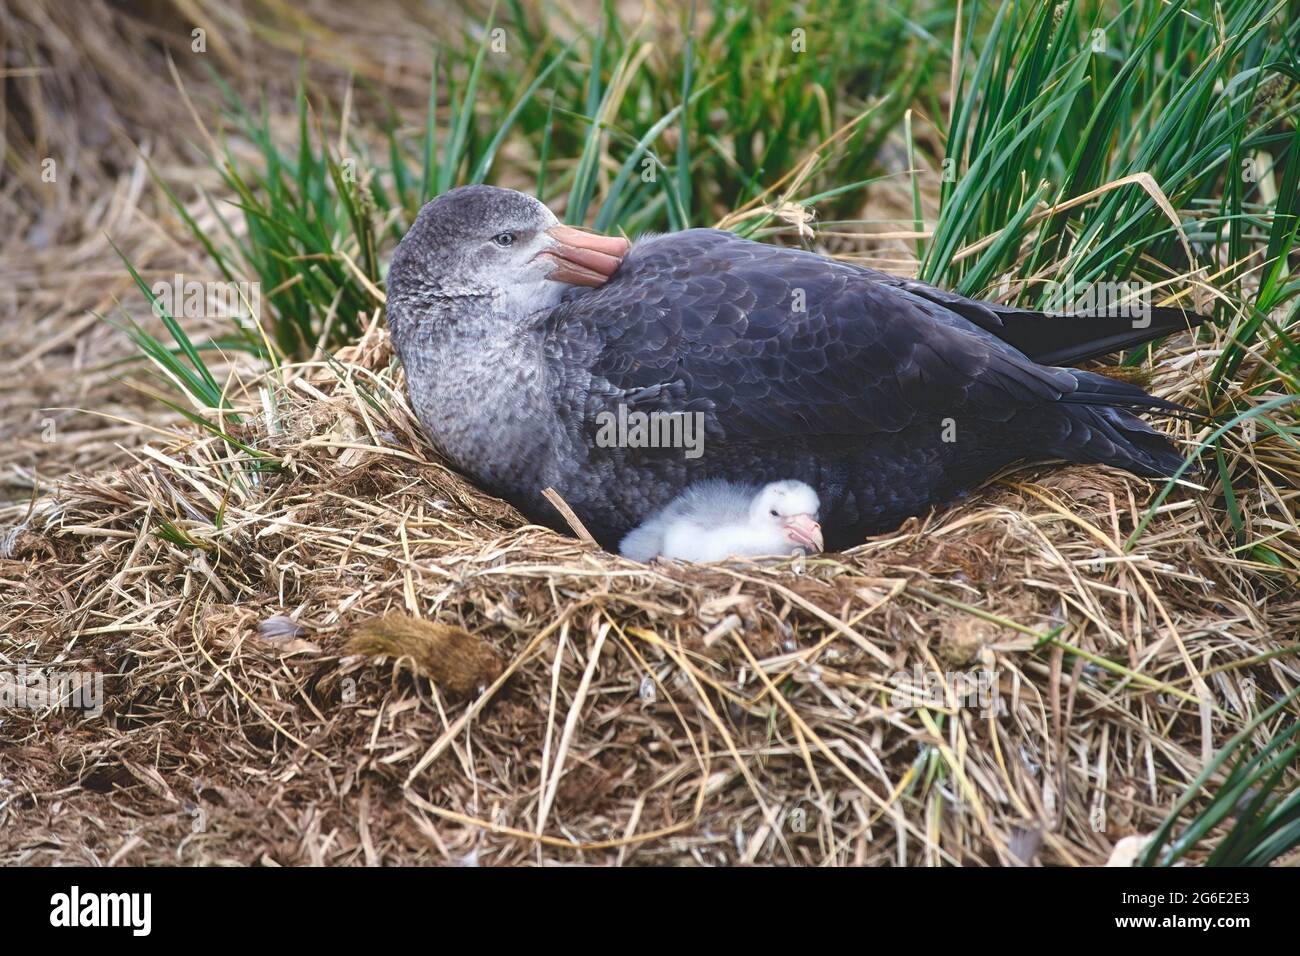 Northern giant petrel (Macronectes halli) with chick in the nest, Prion Island, South Georgia Stock Photo